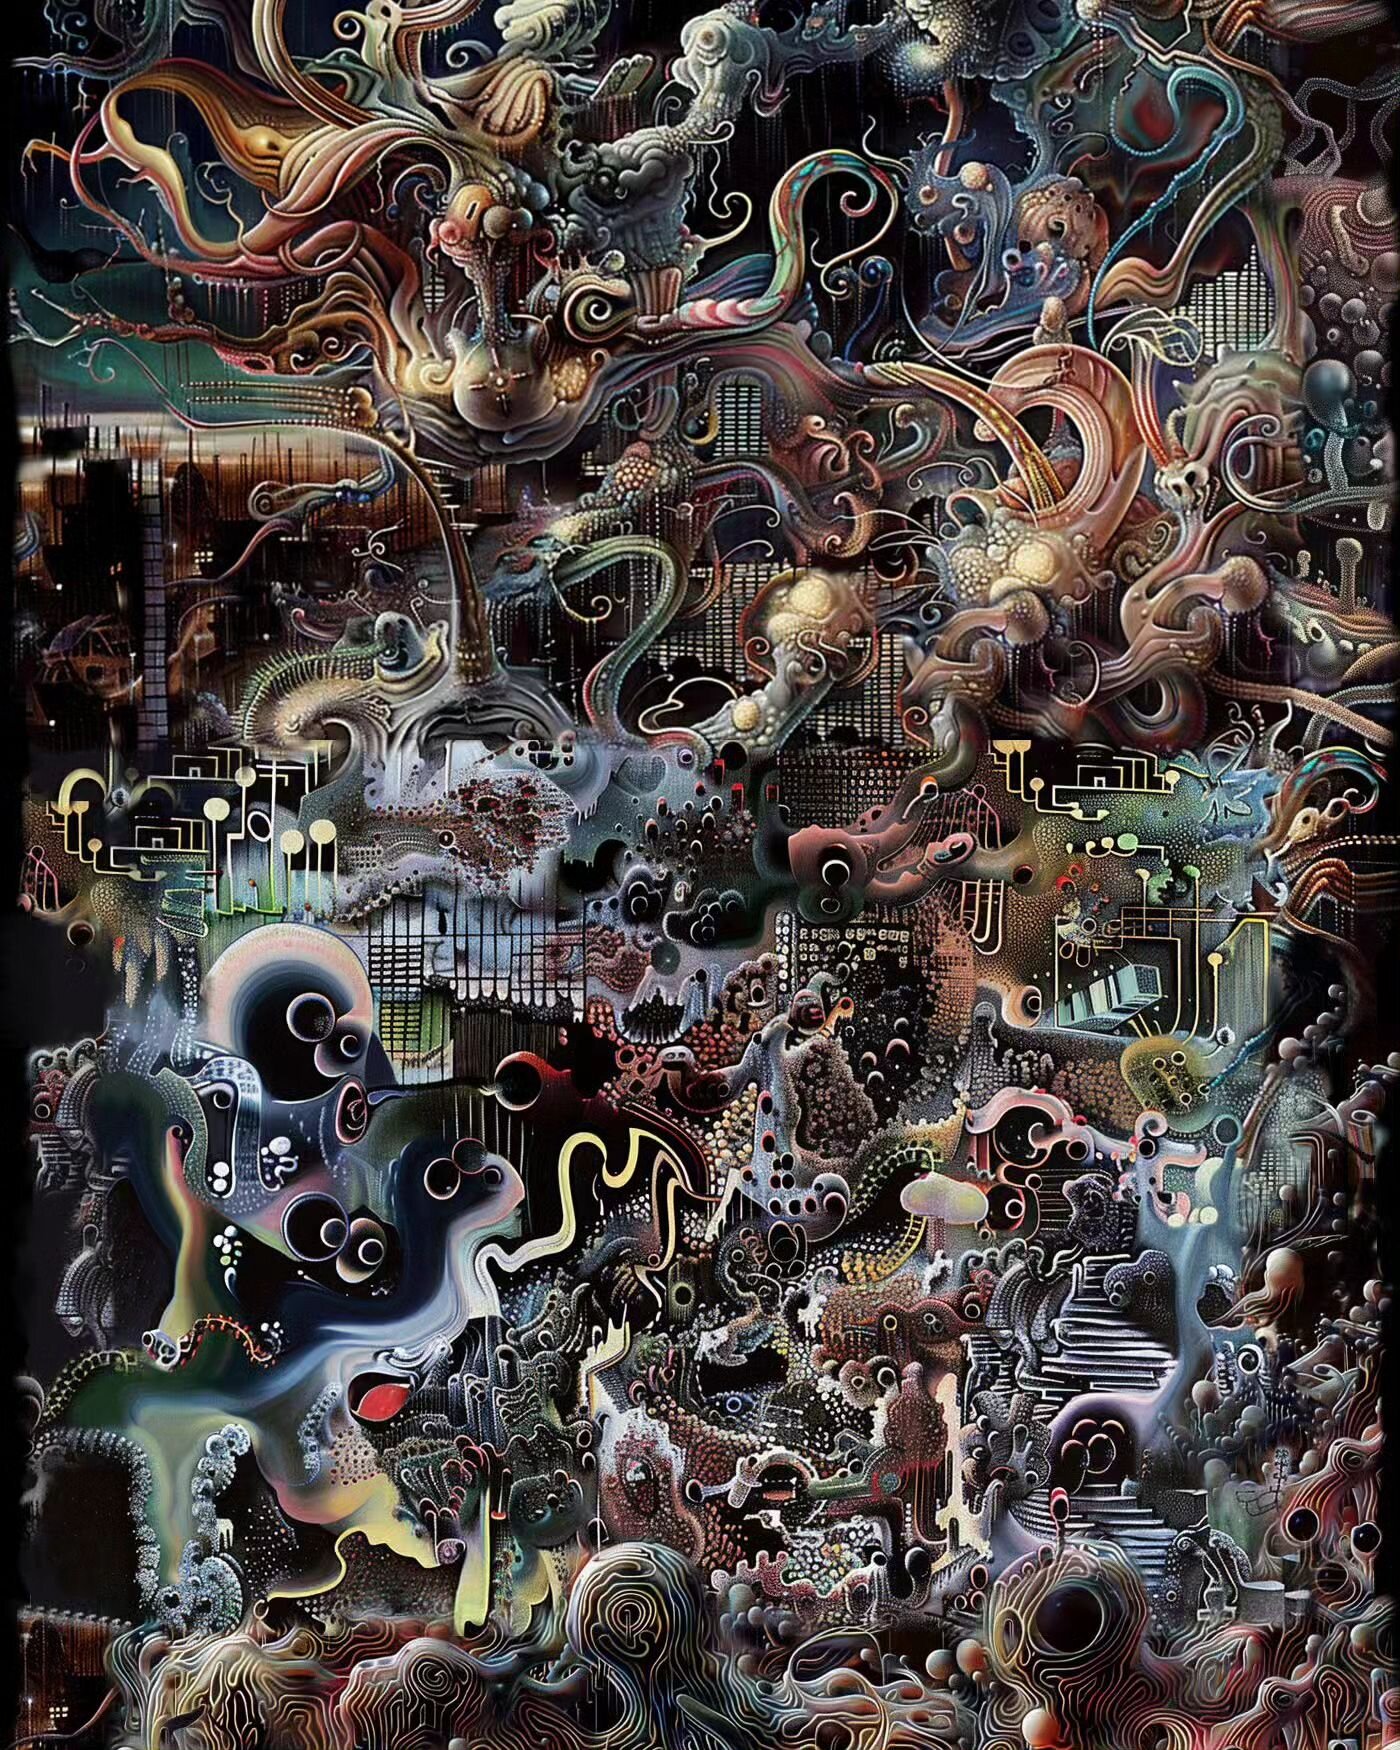 &quot;Turmoil of Joy&quot;
Had great fun making this digital collage/painting from blends of artworks from different stages of my artistic development using ai.
Minted as an nft on @withfoundation

#abstractsurrealism #abstactart #digitalart #aiart #